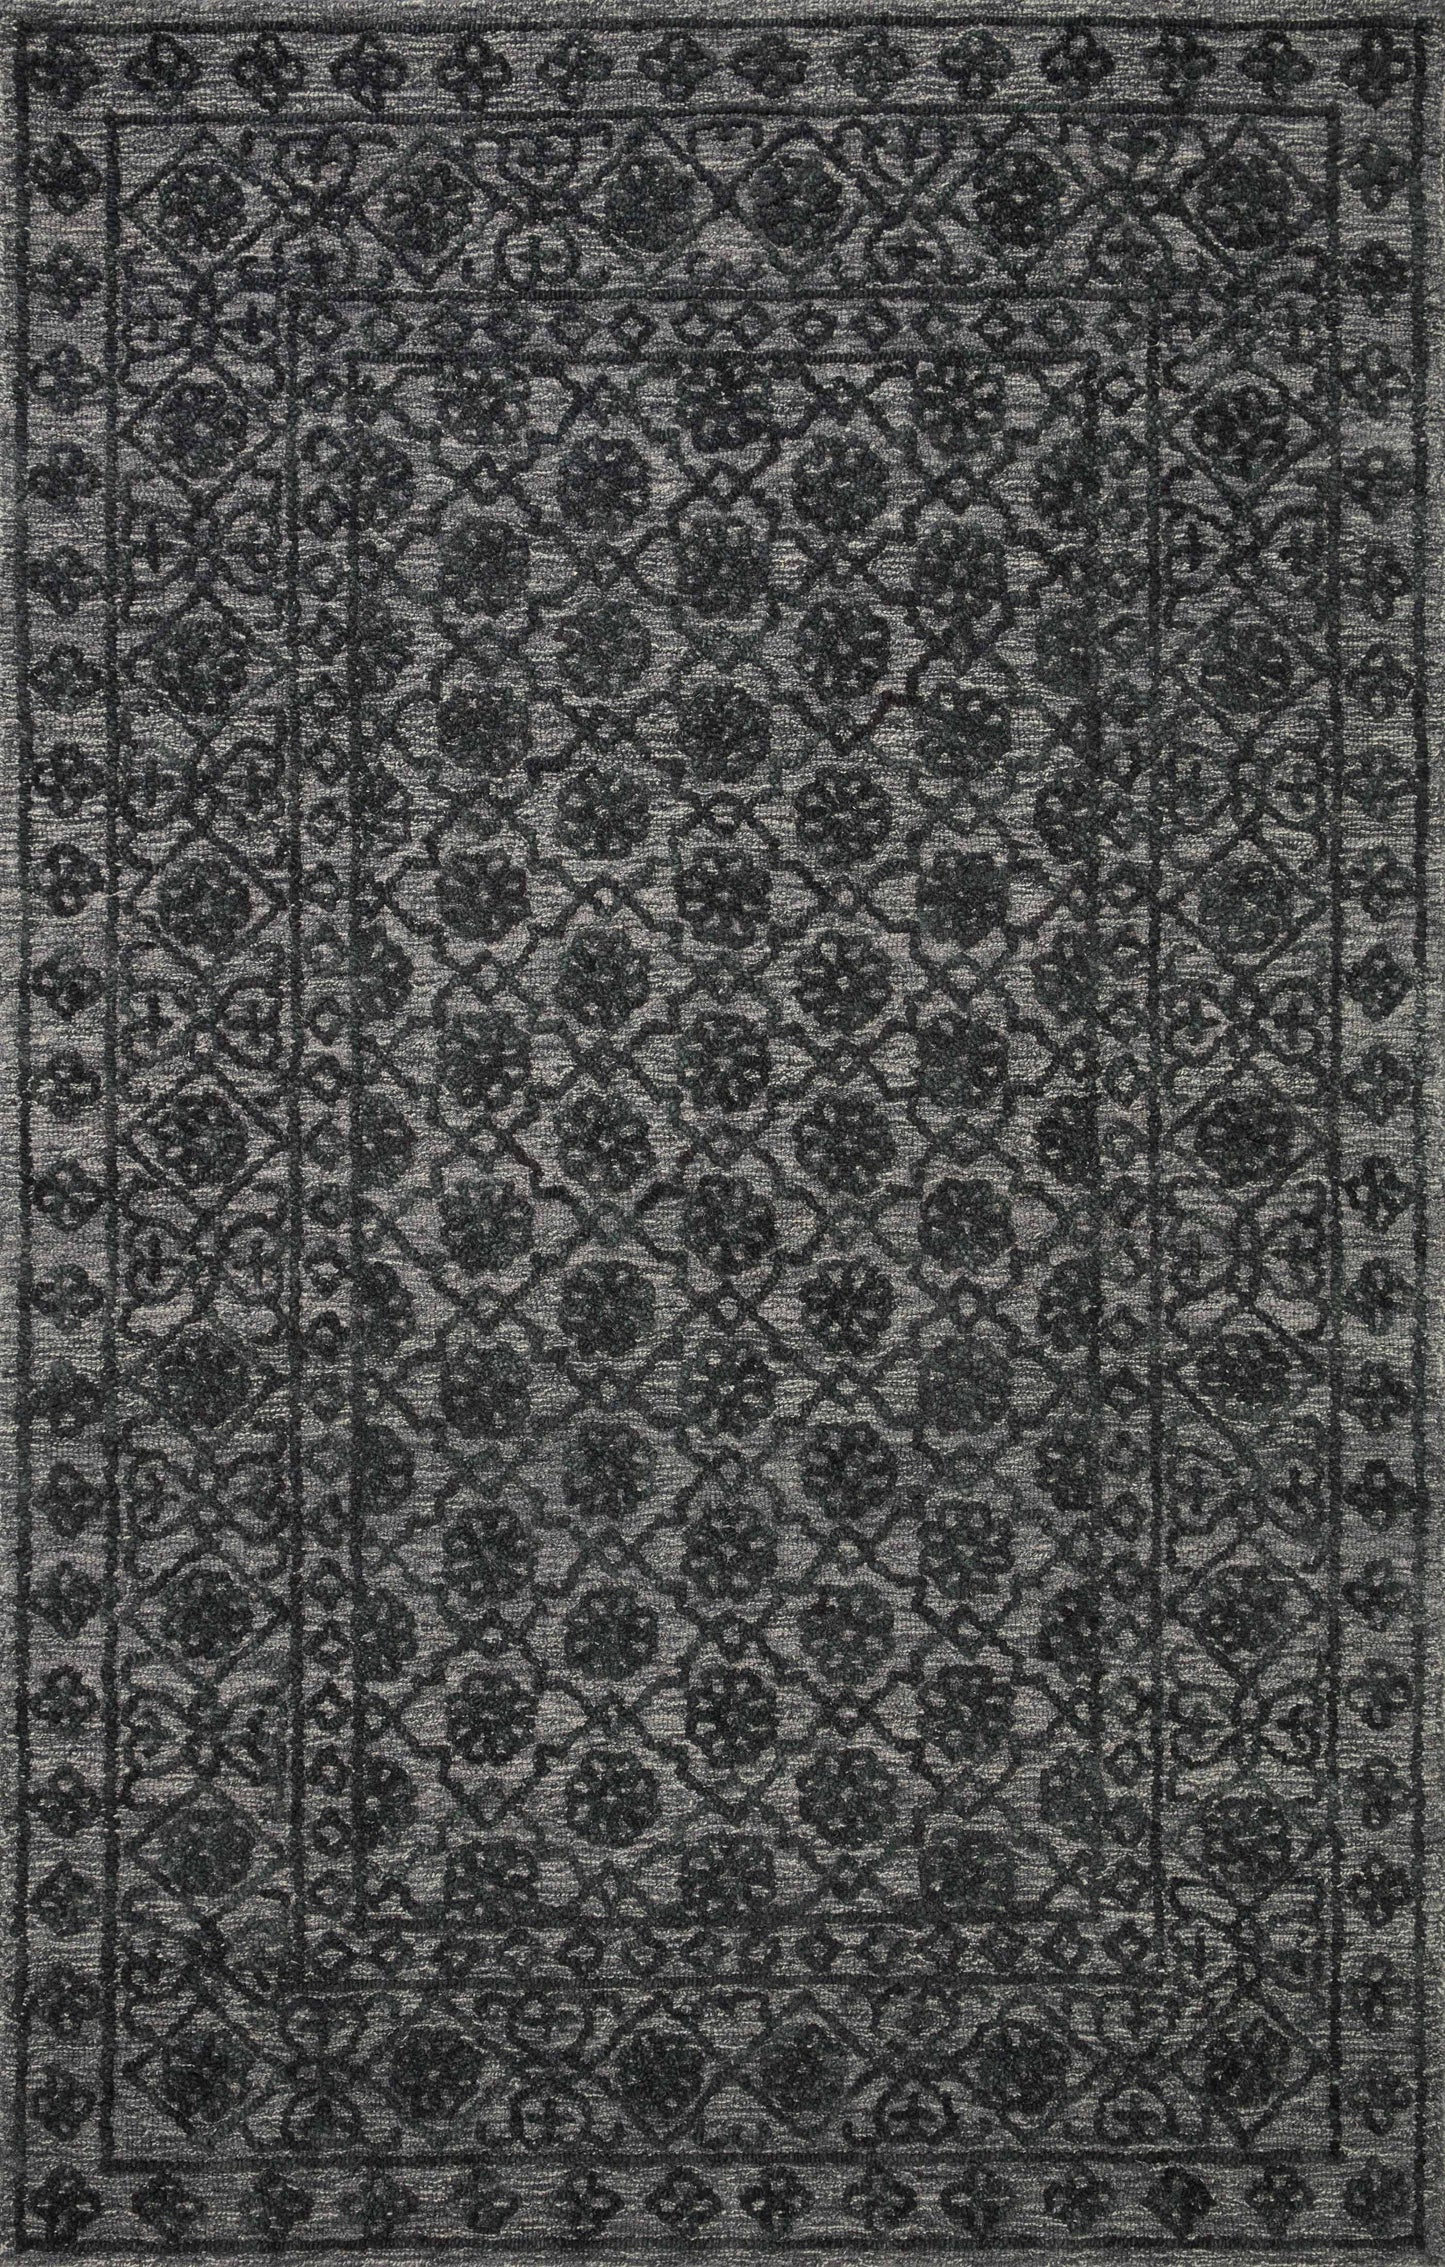 A picture of Loloi's Cecelia rug, in style CEC-01, color Smoke / Dk. Grey